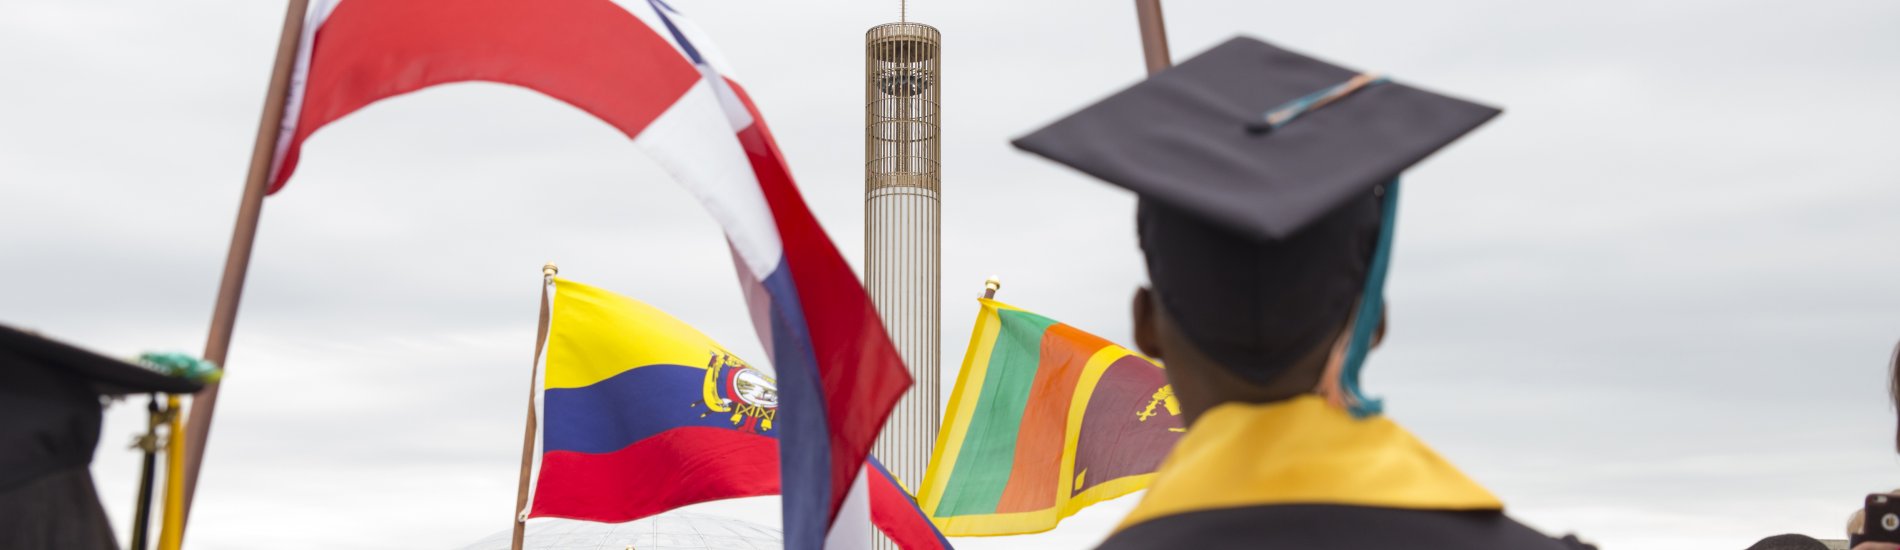 International students carry flags at Commencement.